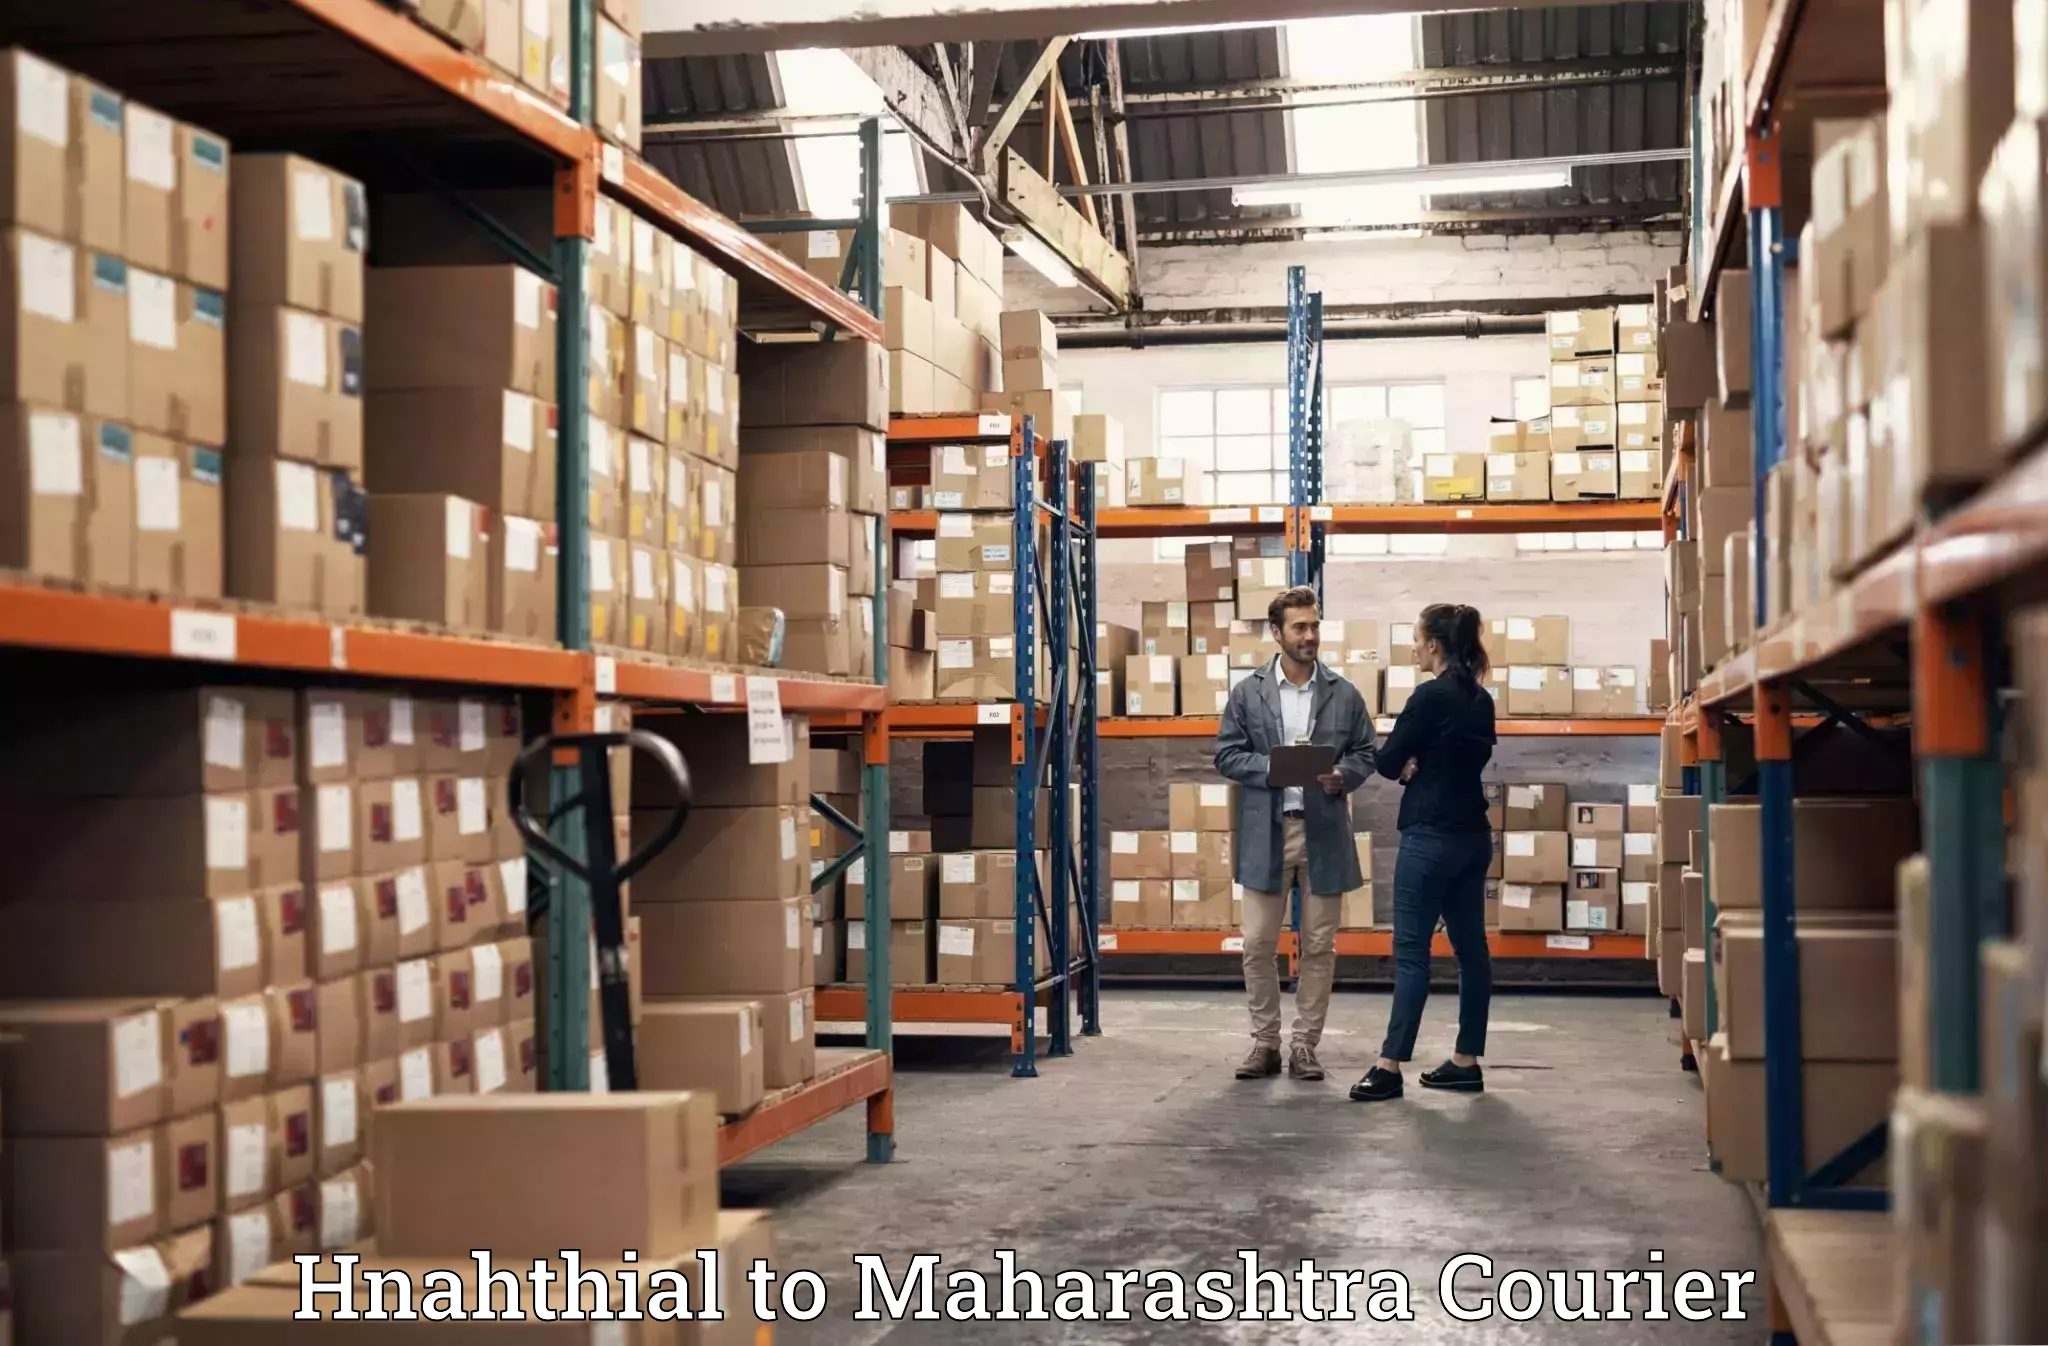 Efficient moving company Hnahthial to Wai